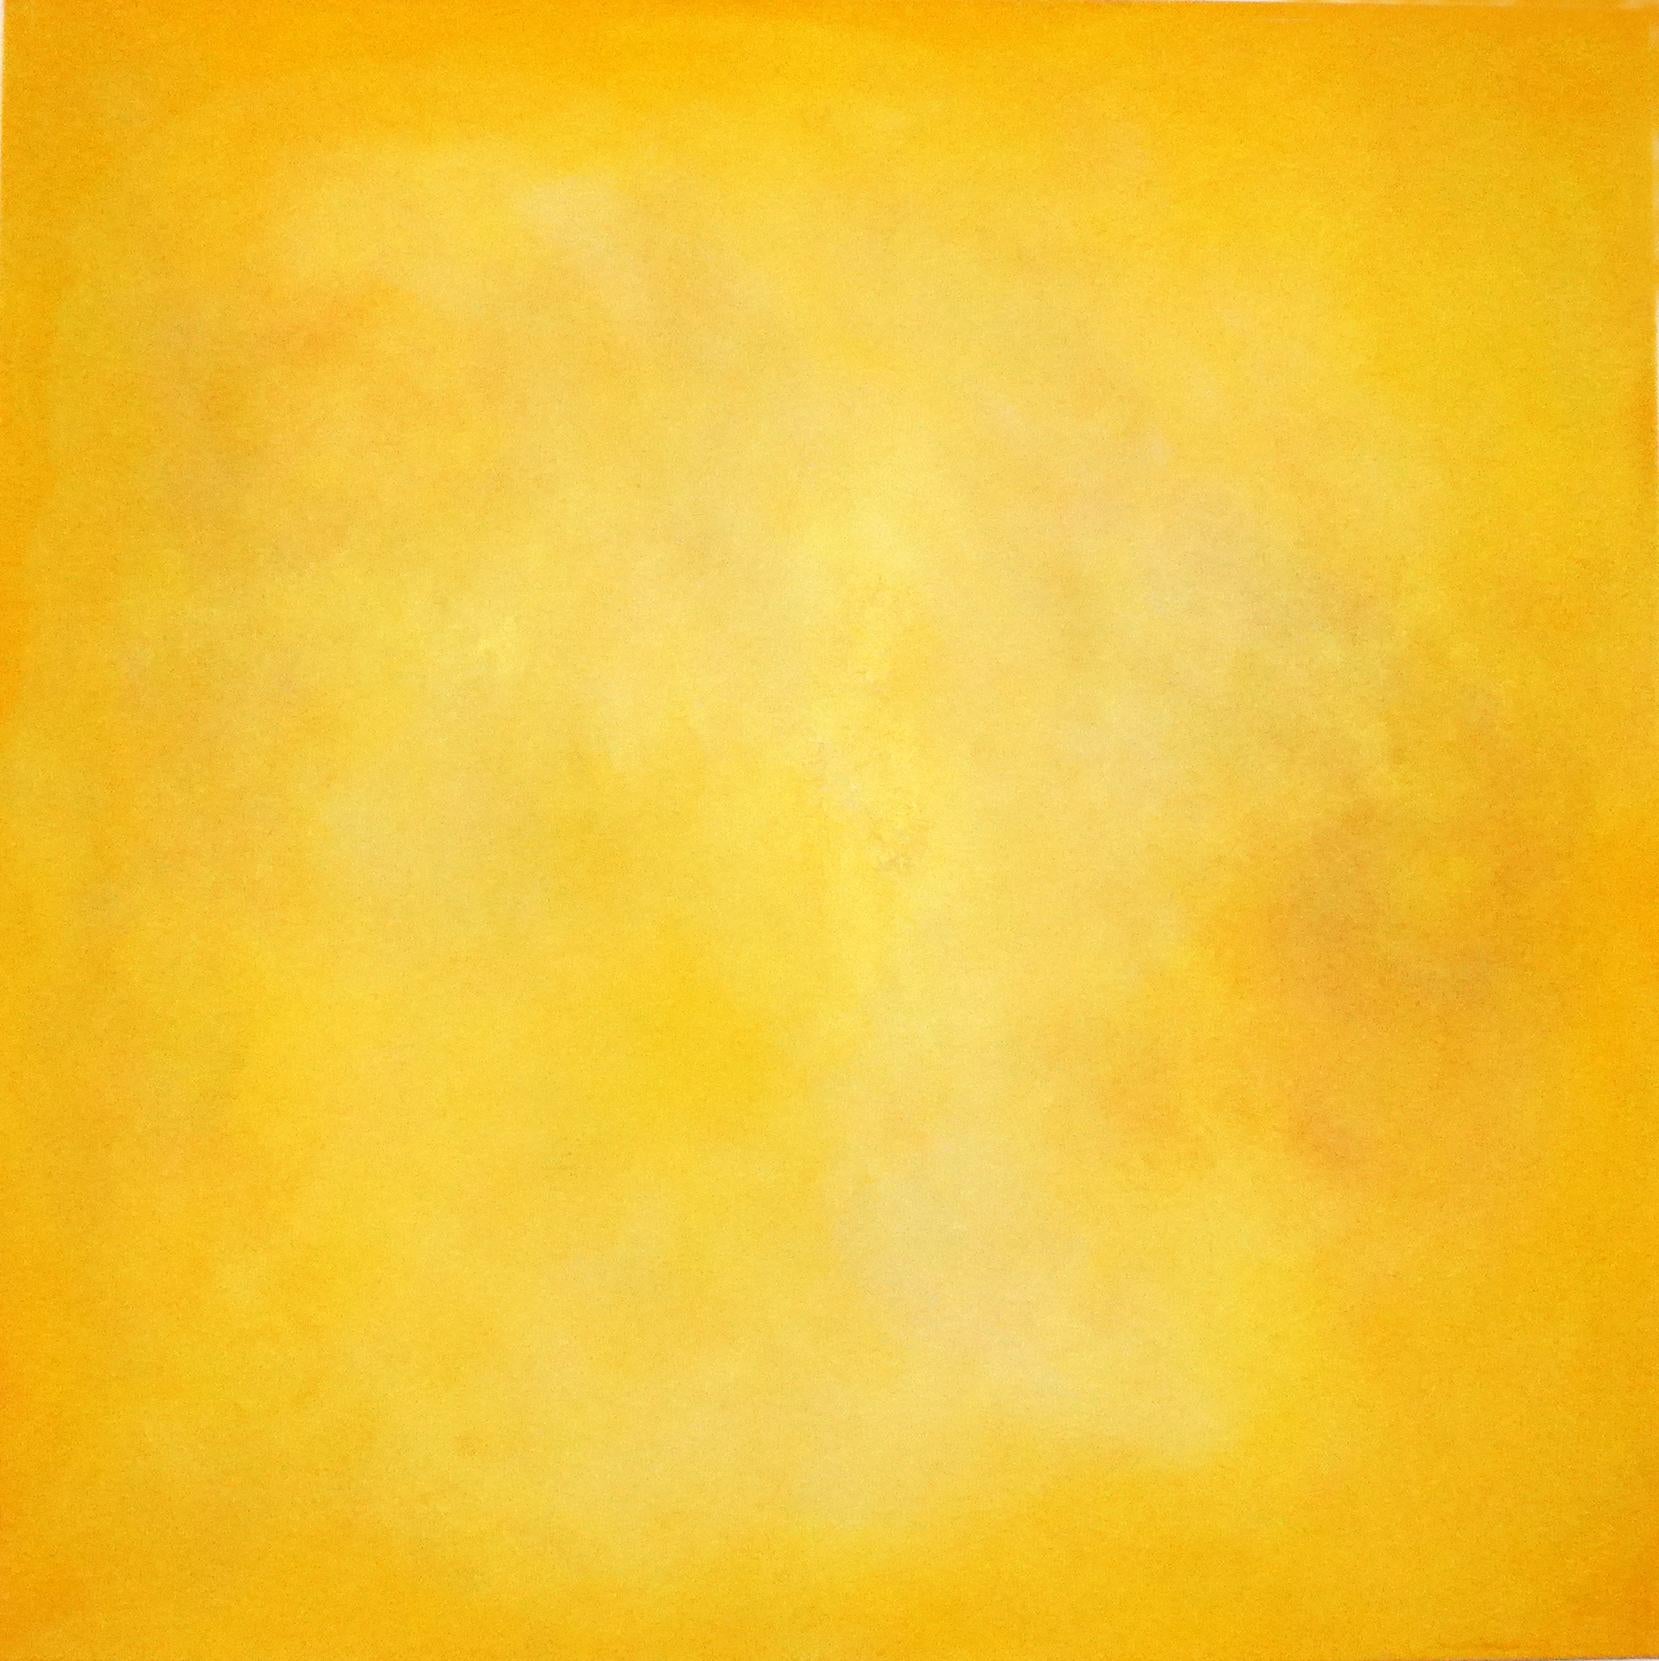 Helios #2, sun God, The Apollo Trilogy - Painting by Julie Hedrick